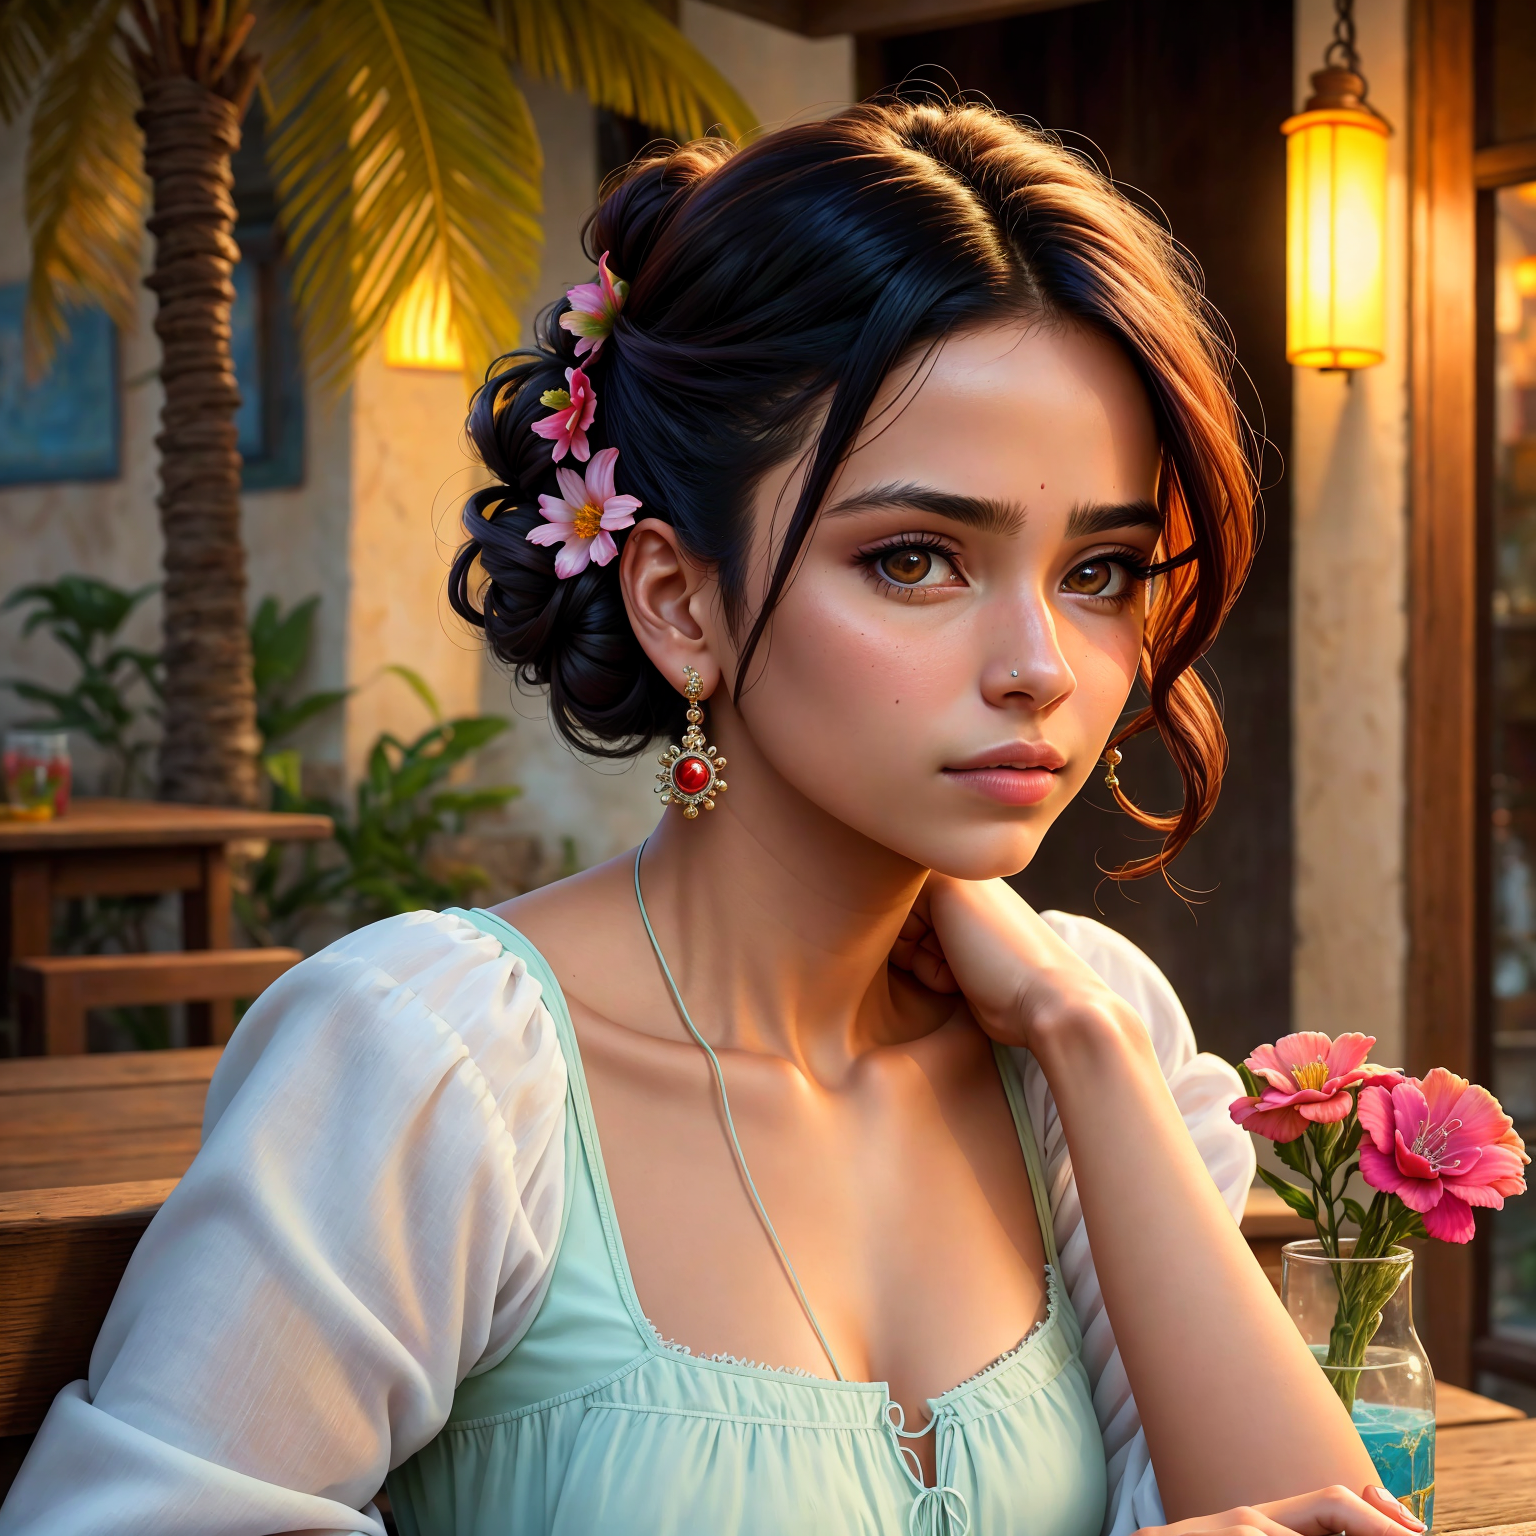 portrait of beautiful mexican woman updo flowers in hair coastal village cantina patio (SouthOfTheBorderSD15:1)
(masterpie...